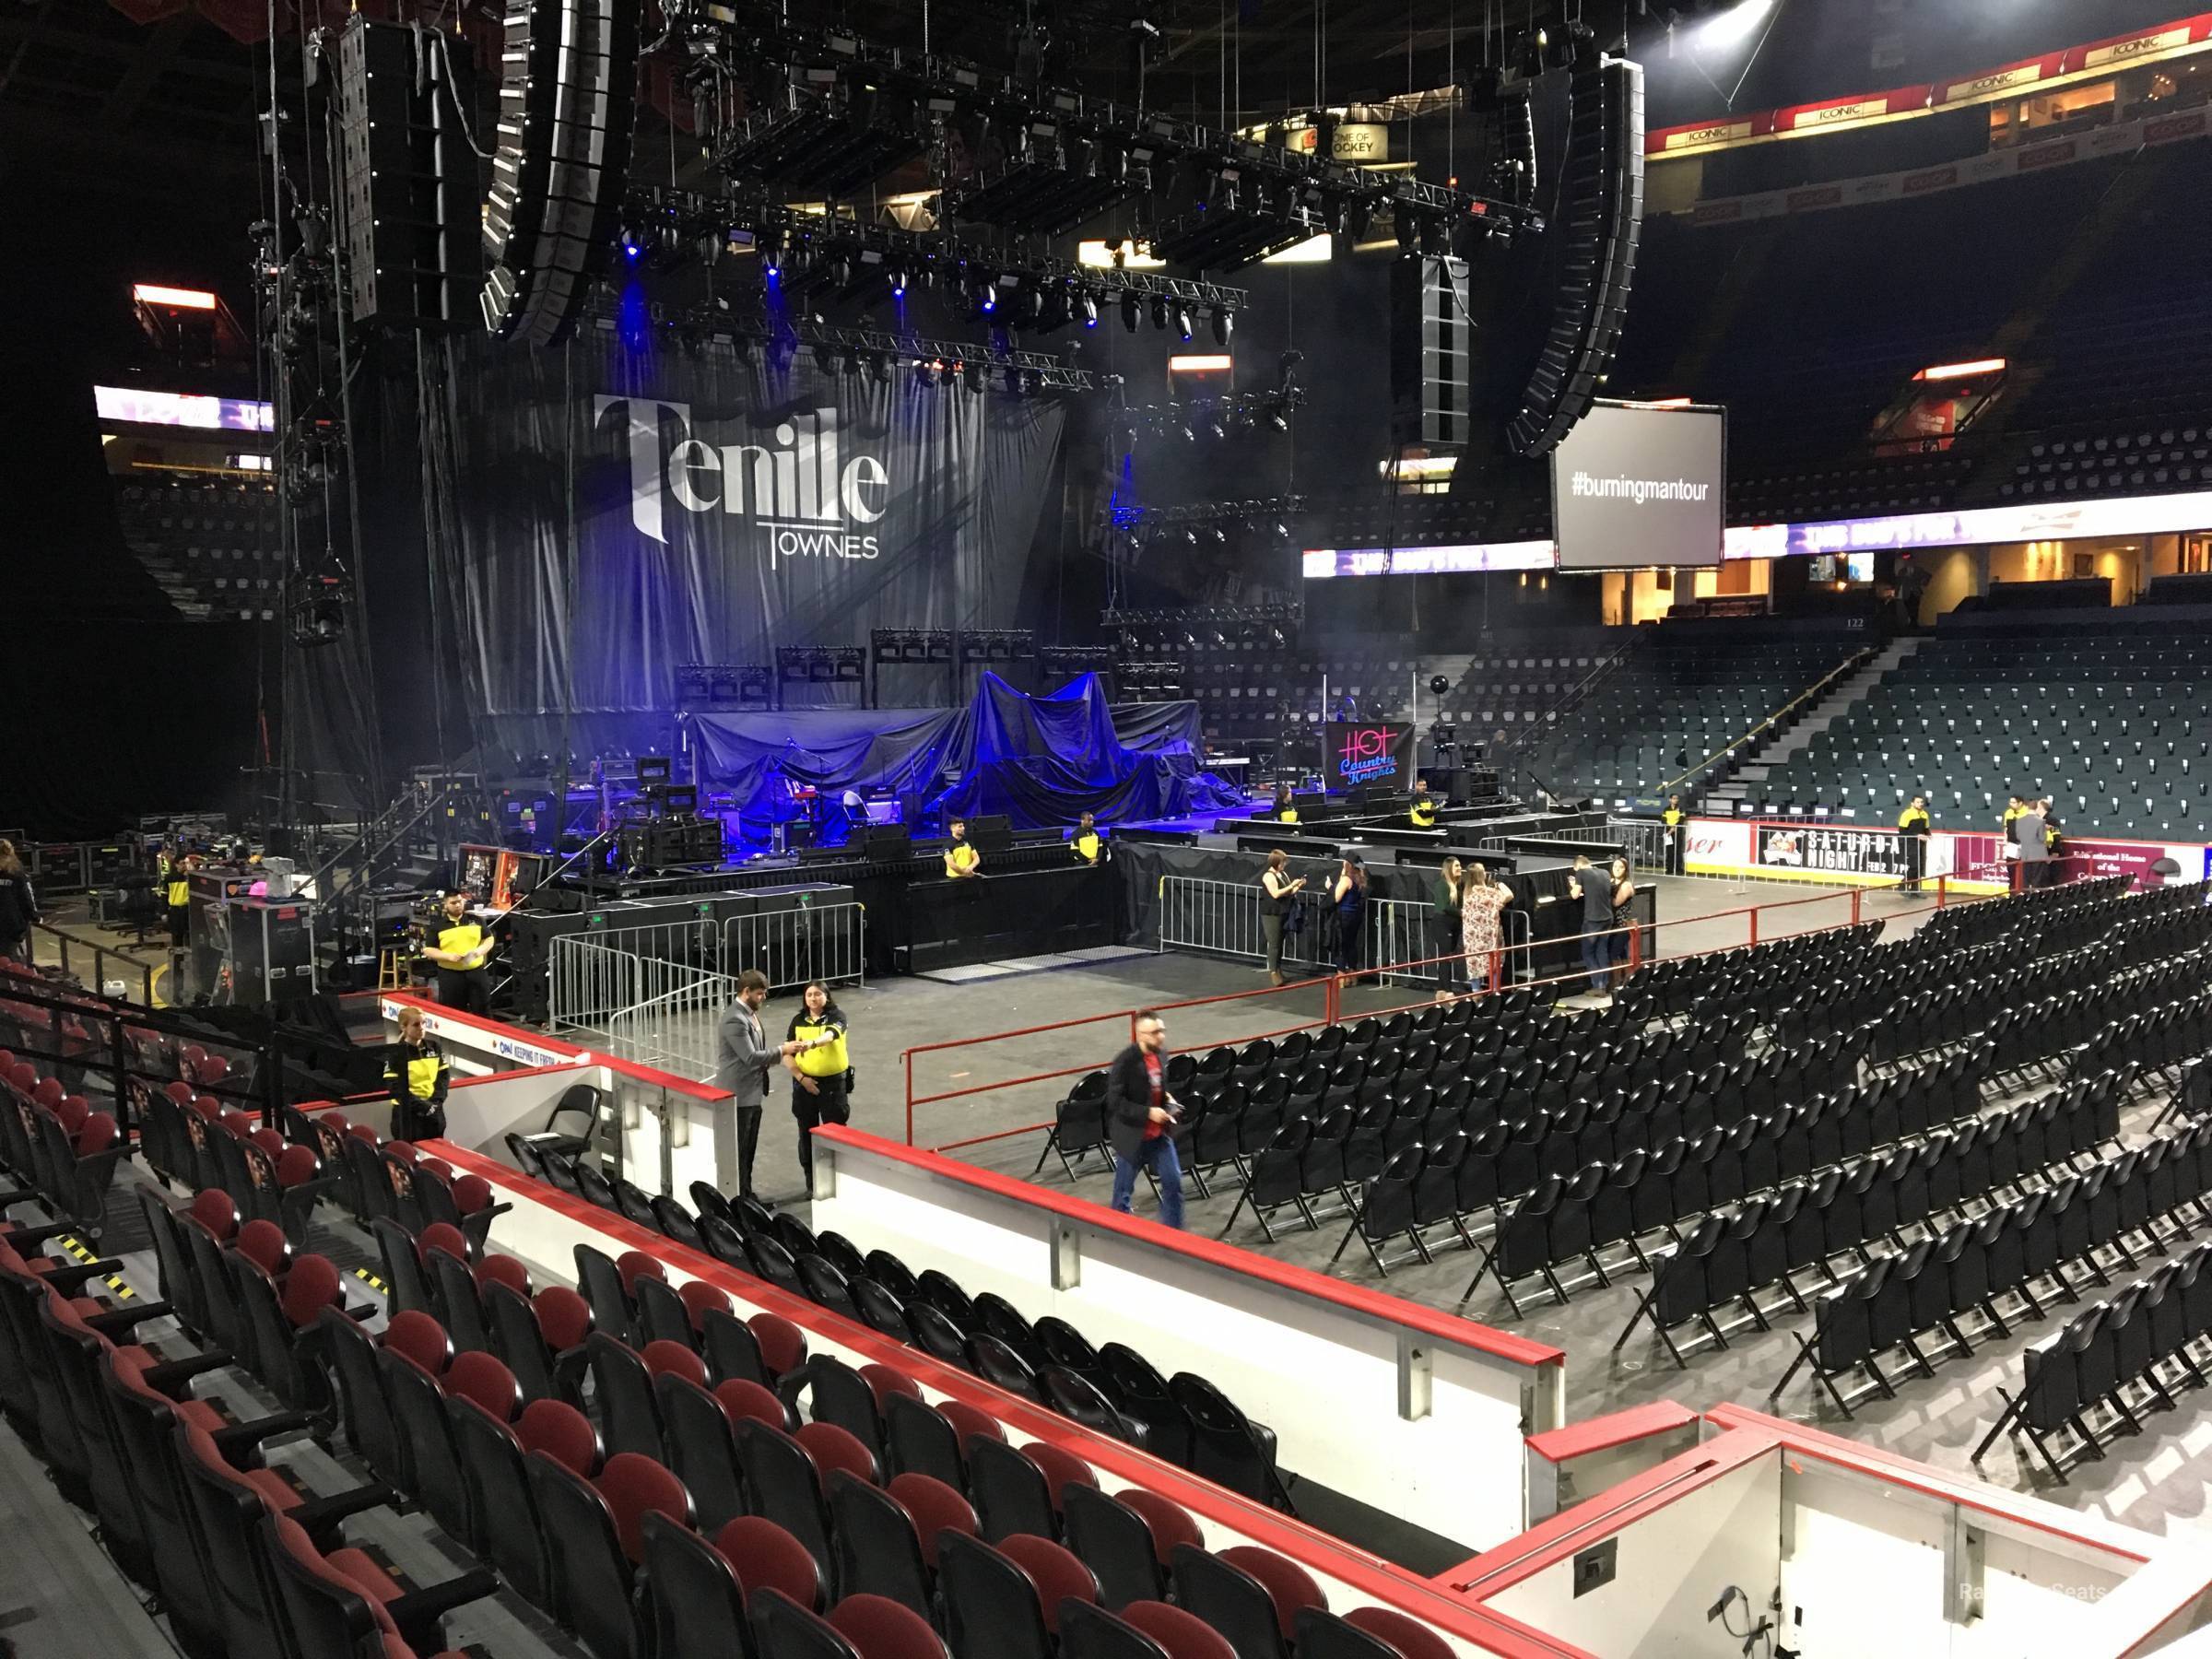 section 109, row 5 seat view  for concert - scotiabank saddledome